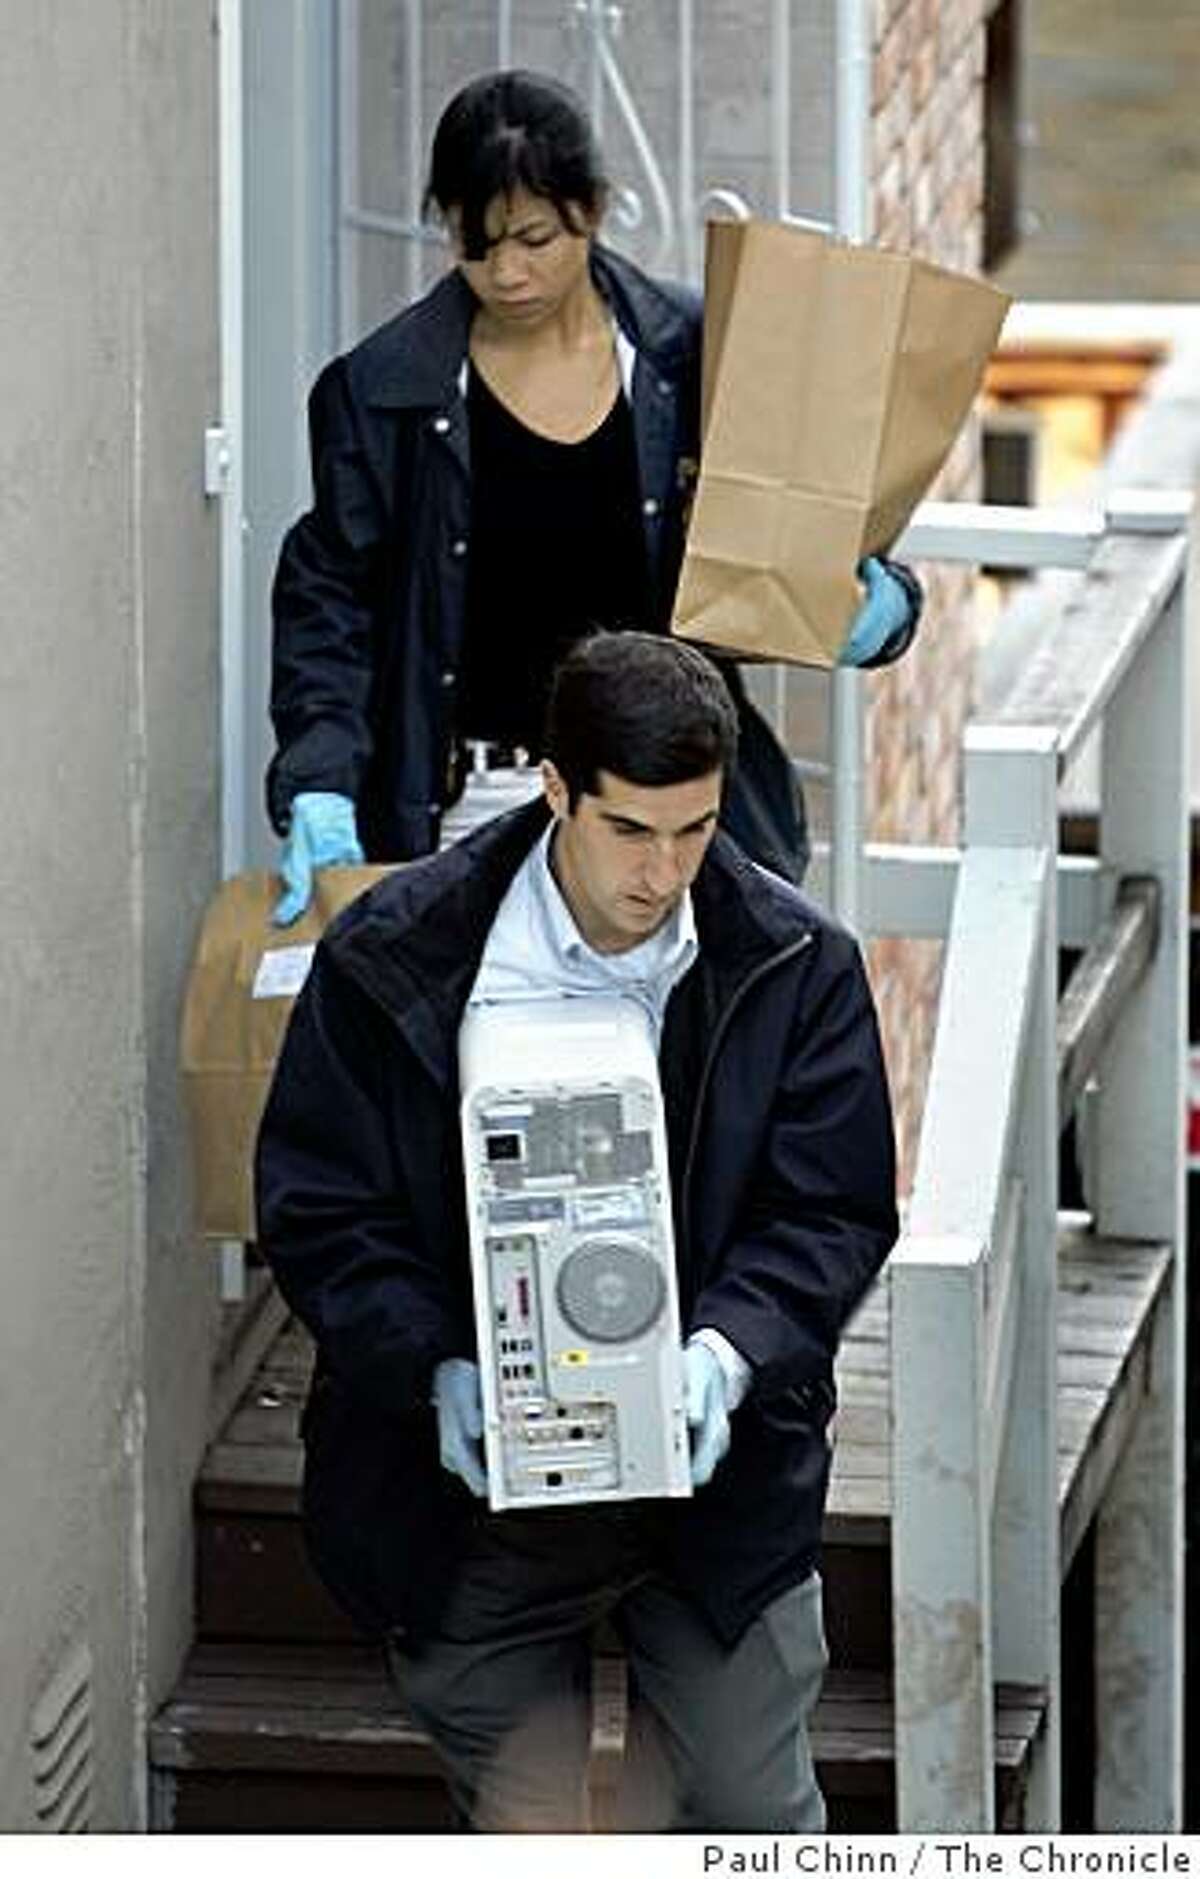 Federal agents removed two desktop computers and several unmarked bags of evidence from Nick Perata's home. FBI and IRS authorities served a search warrant at the home of Nick Perata on 12/15/04 in Oakland, CA. Perata and his father state Senate Leader Don Perata are under federal investigation.